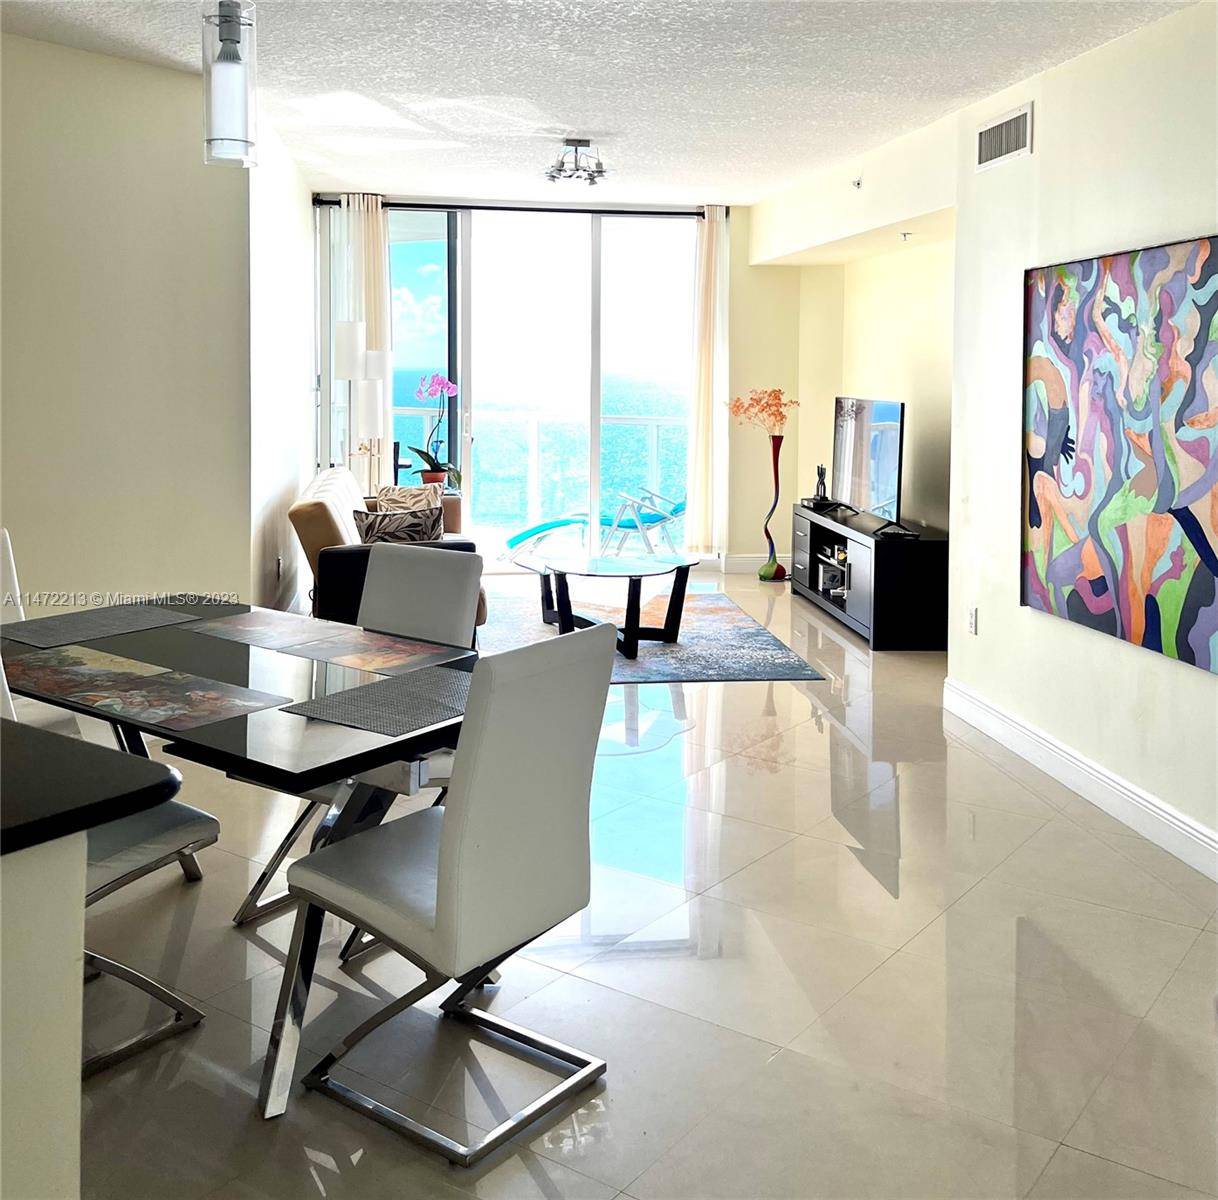 In the heart of Sunny Isles, enjoy resort style living in large 1 bedroom 1.